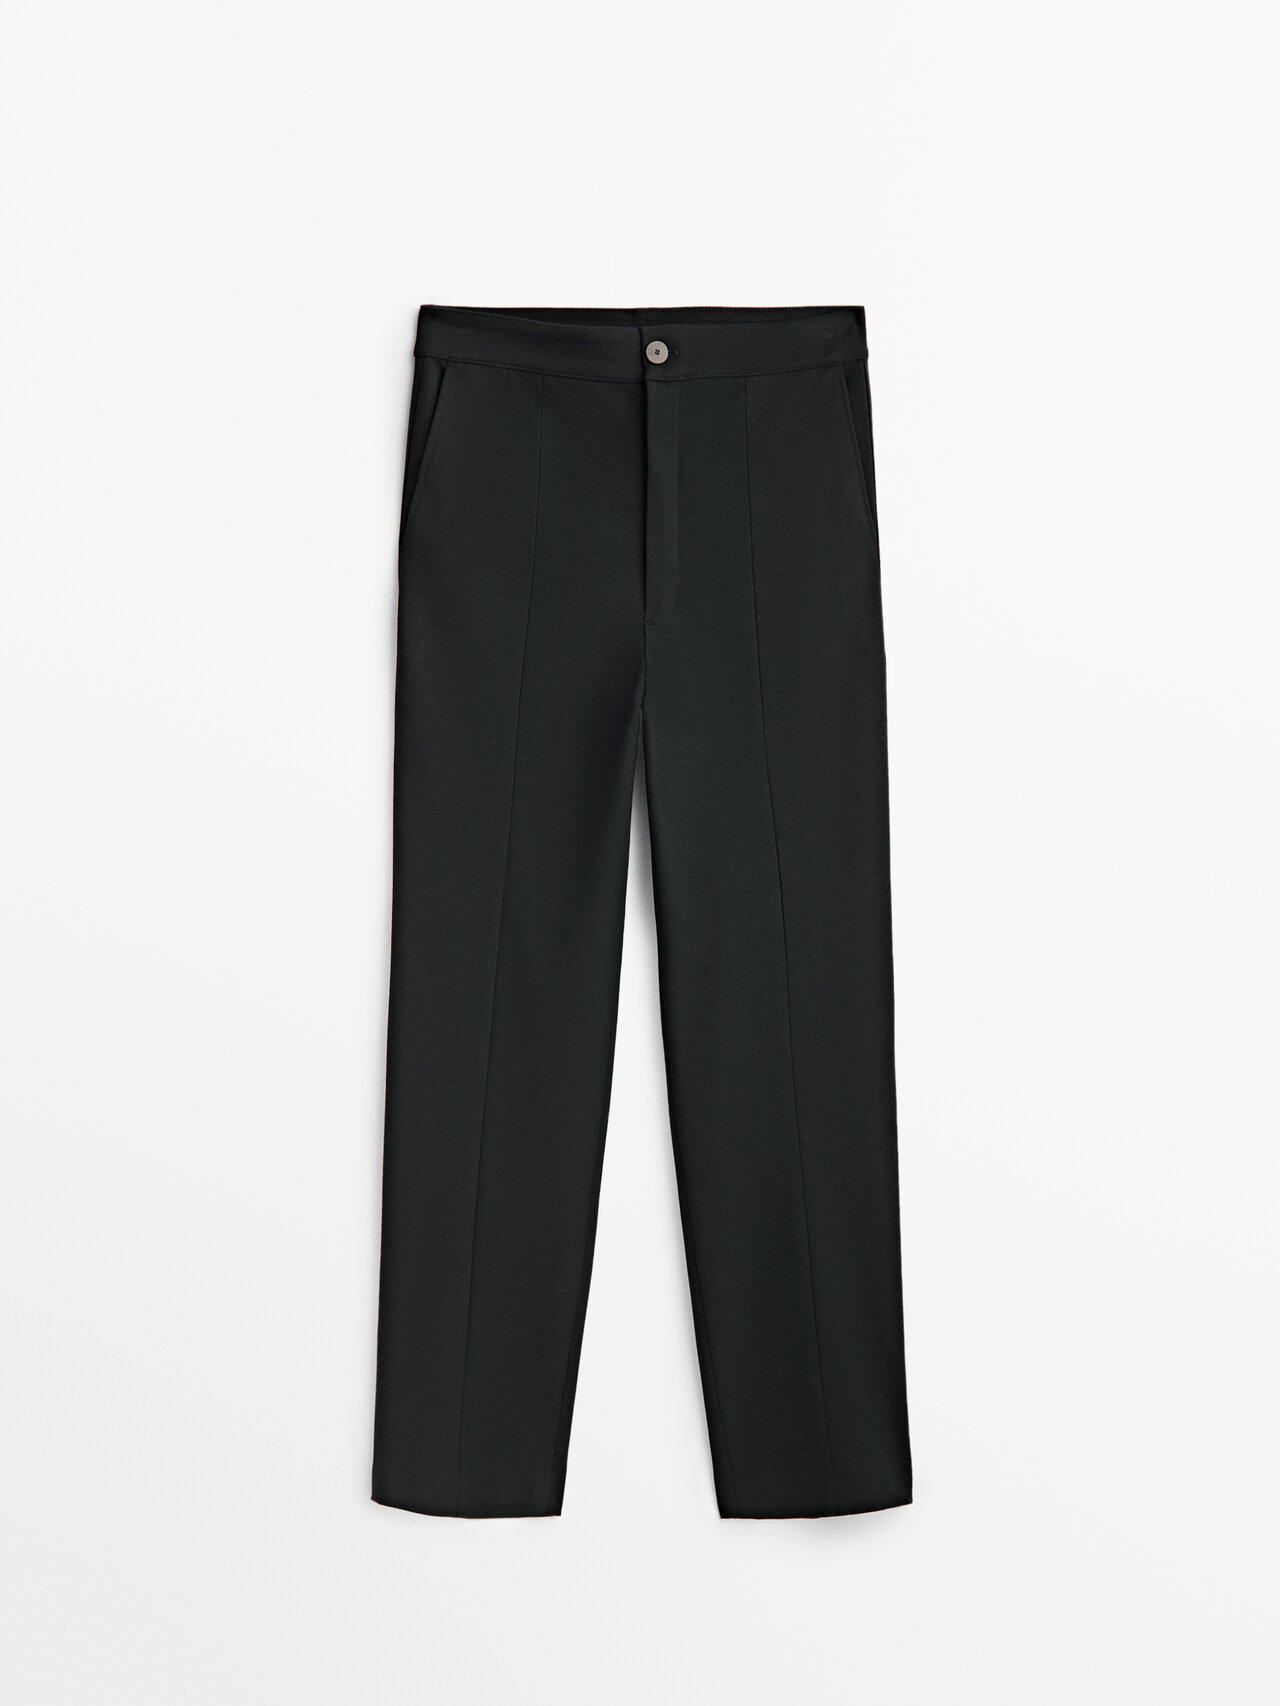 Massimo Dutti Slim Fit Trousers With Central Seam In Black | ModeSens